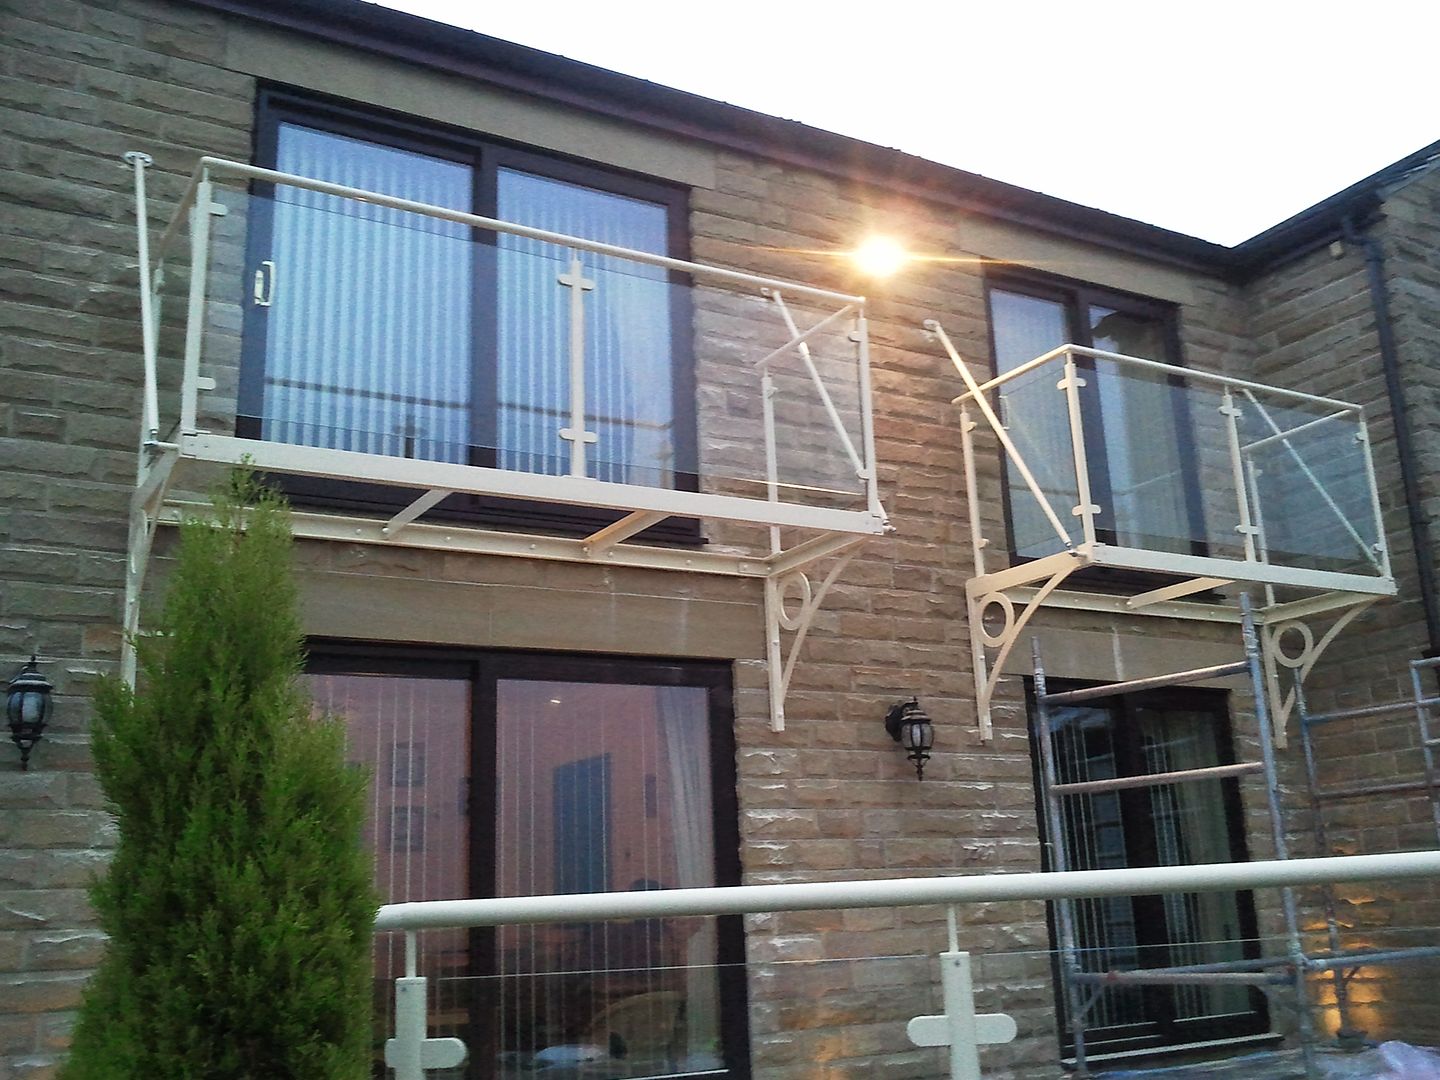 Walk out balcony balustrade with tie rod support bars uk